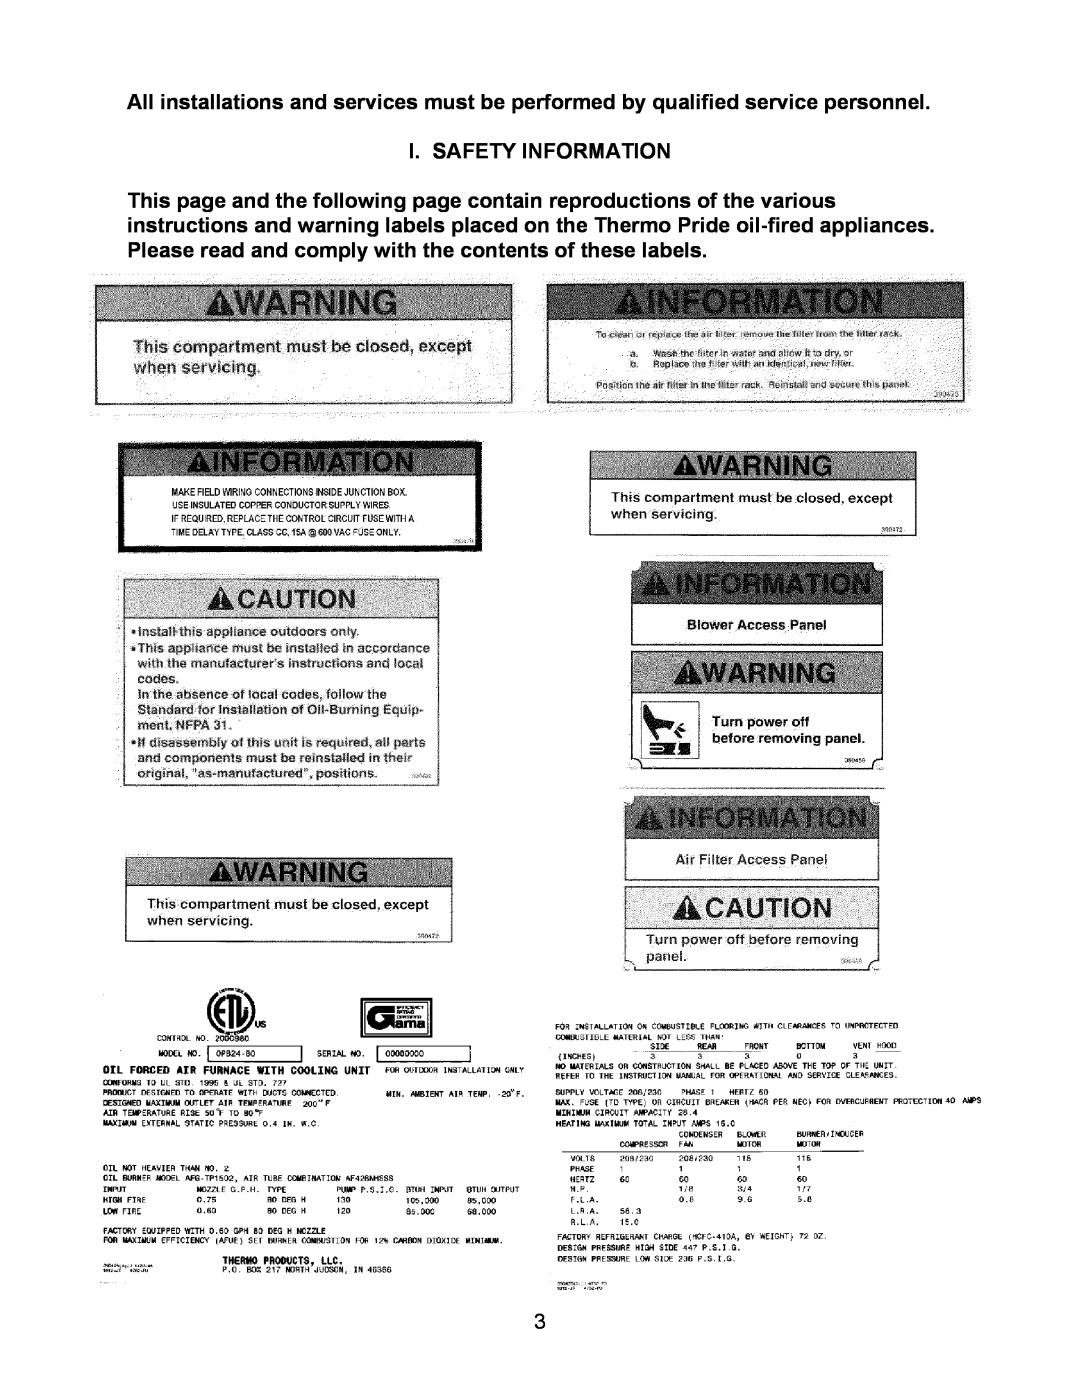 Thermo Products 36)- 80, OPB (24, 30 service manual I. Safety Information 